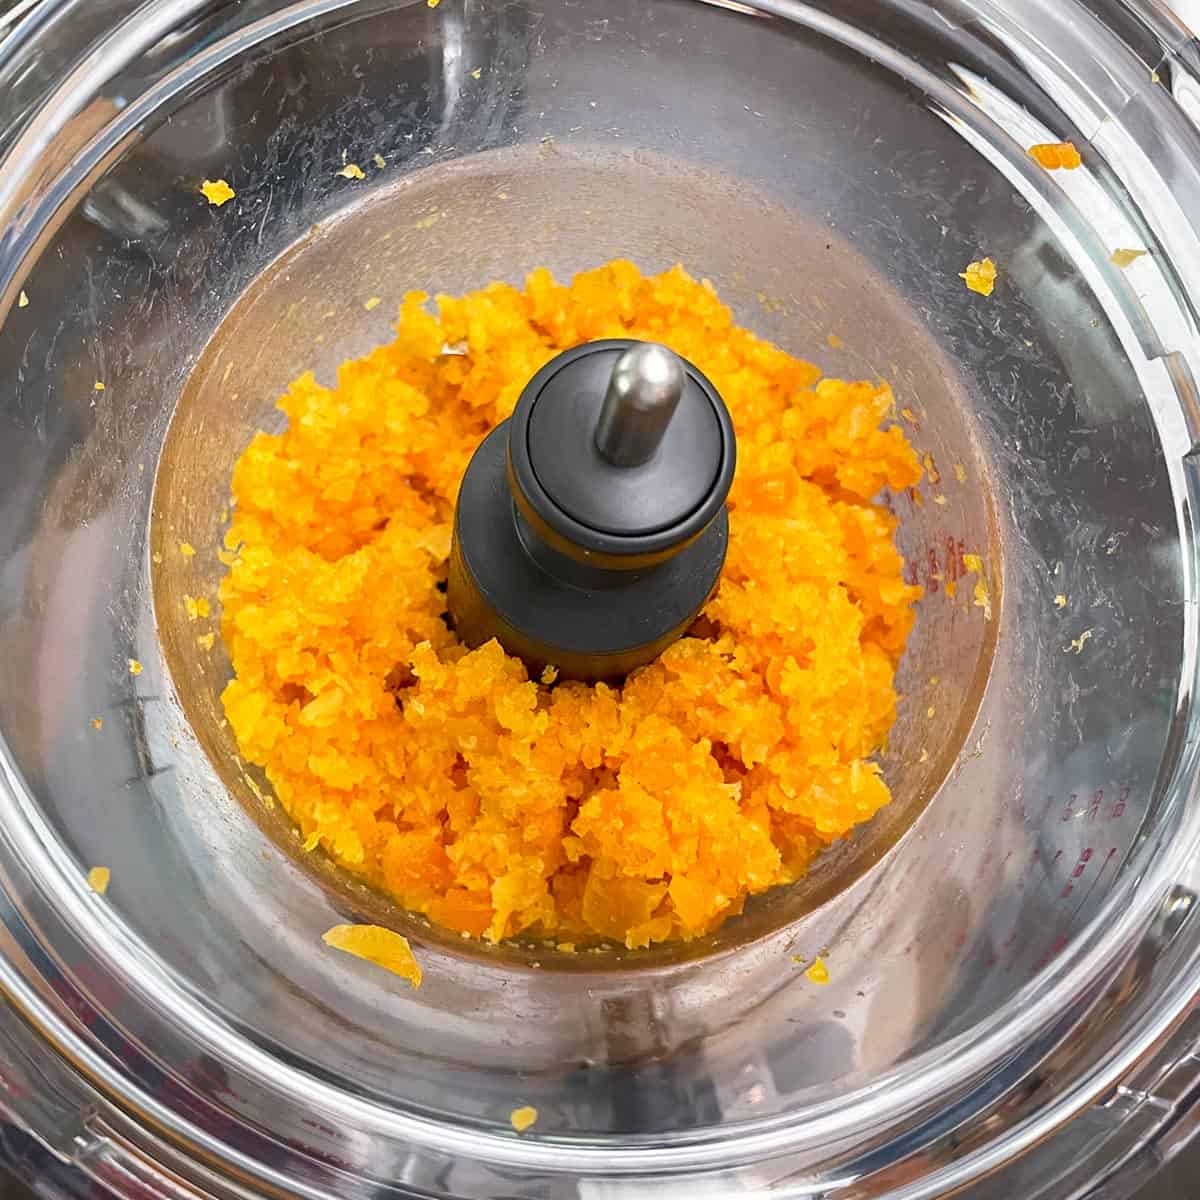 Dried apricots in a food processor after being diced.